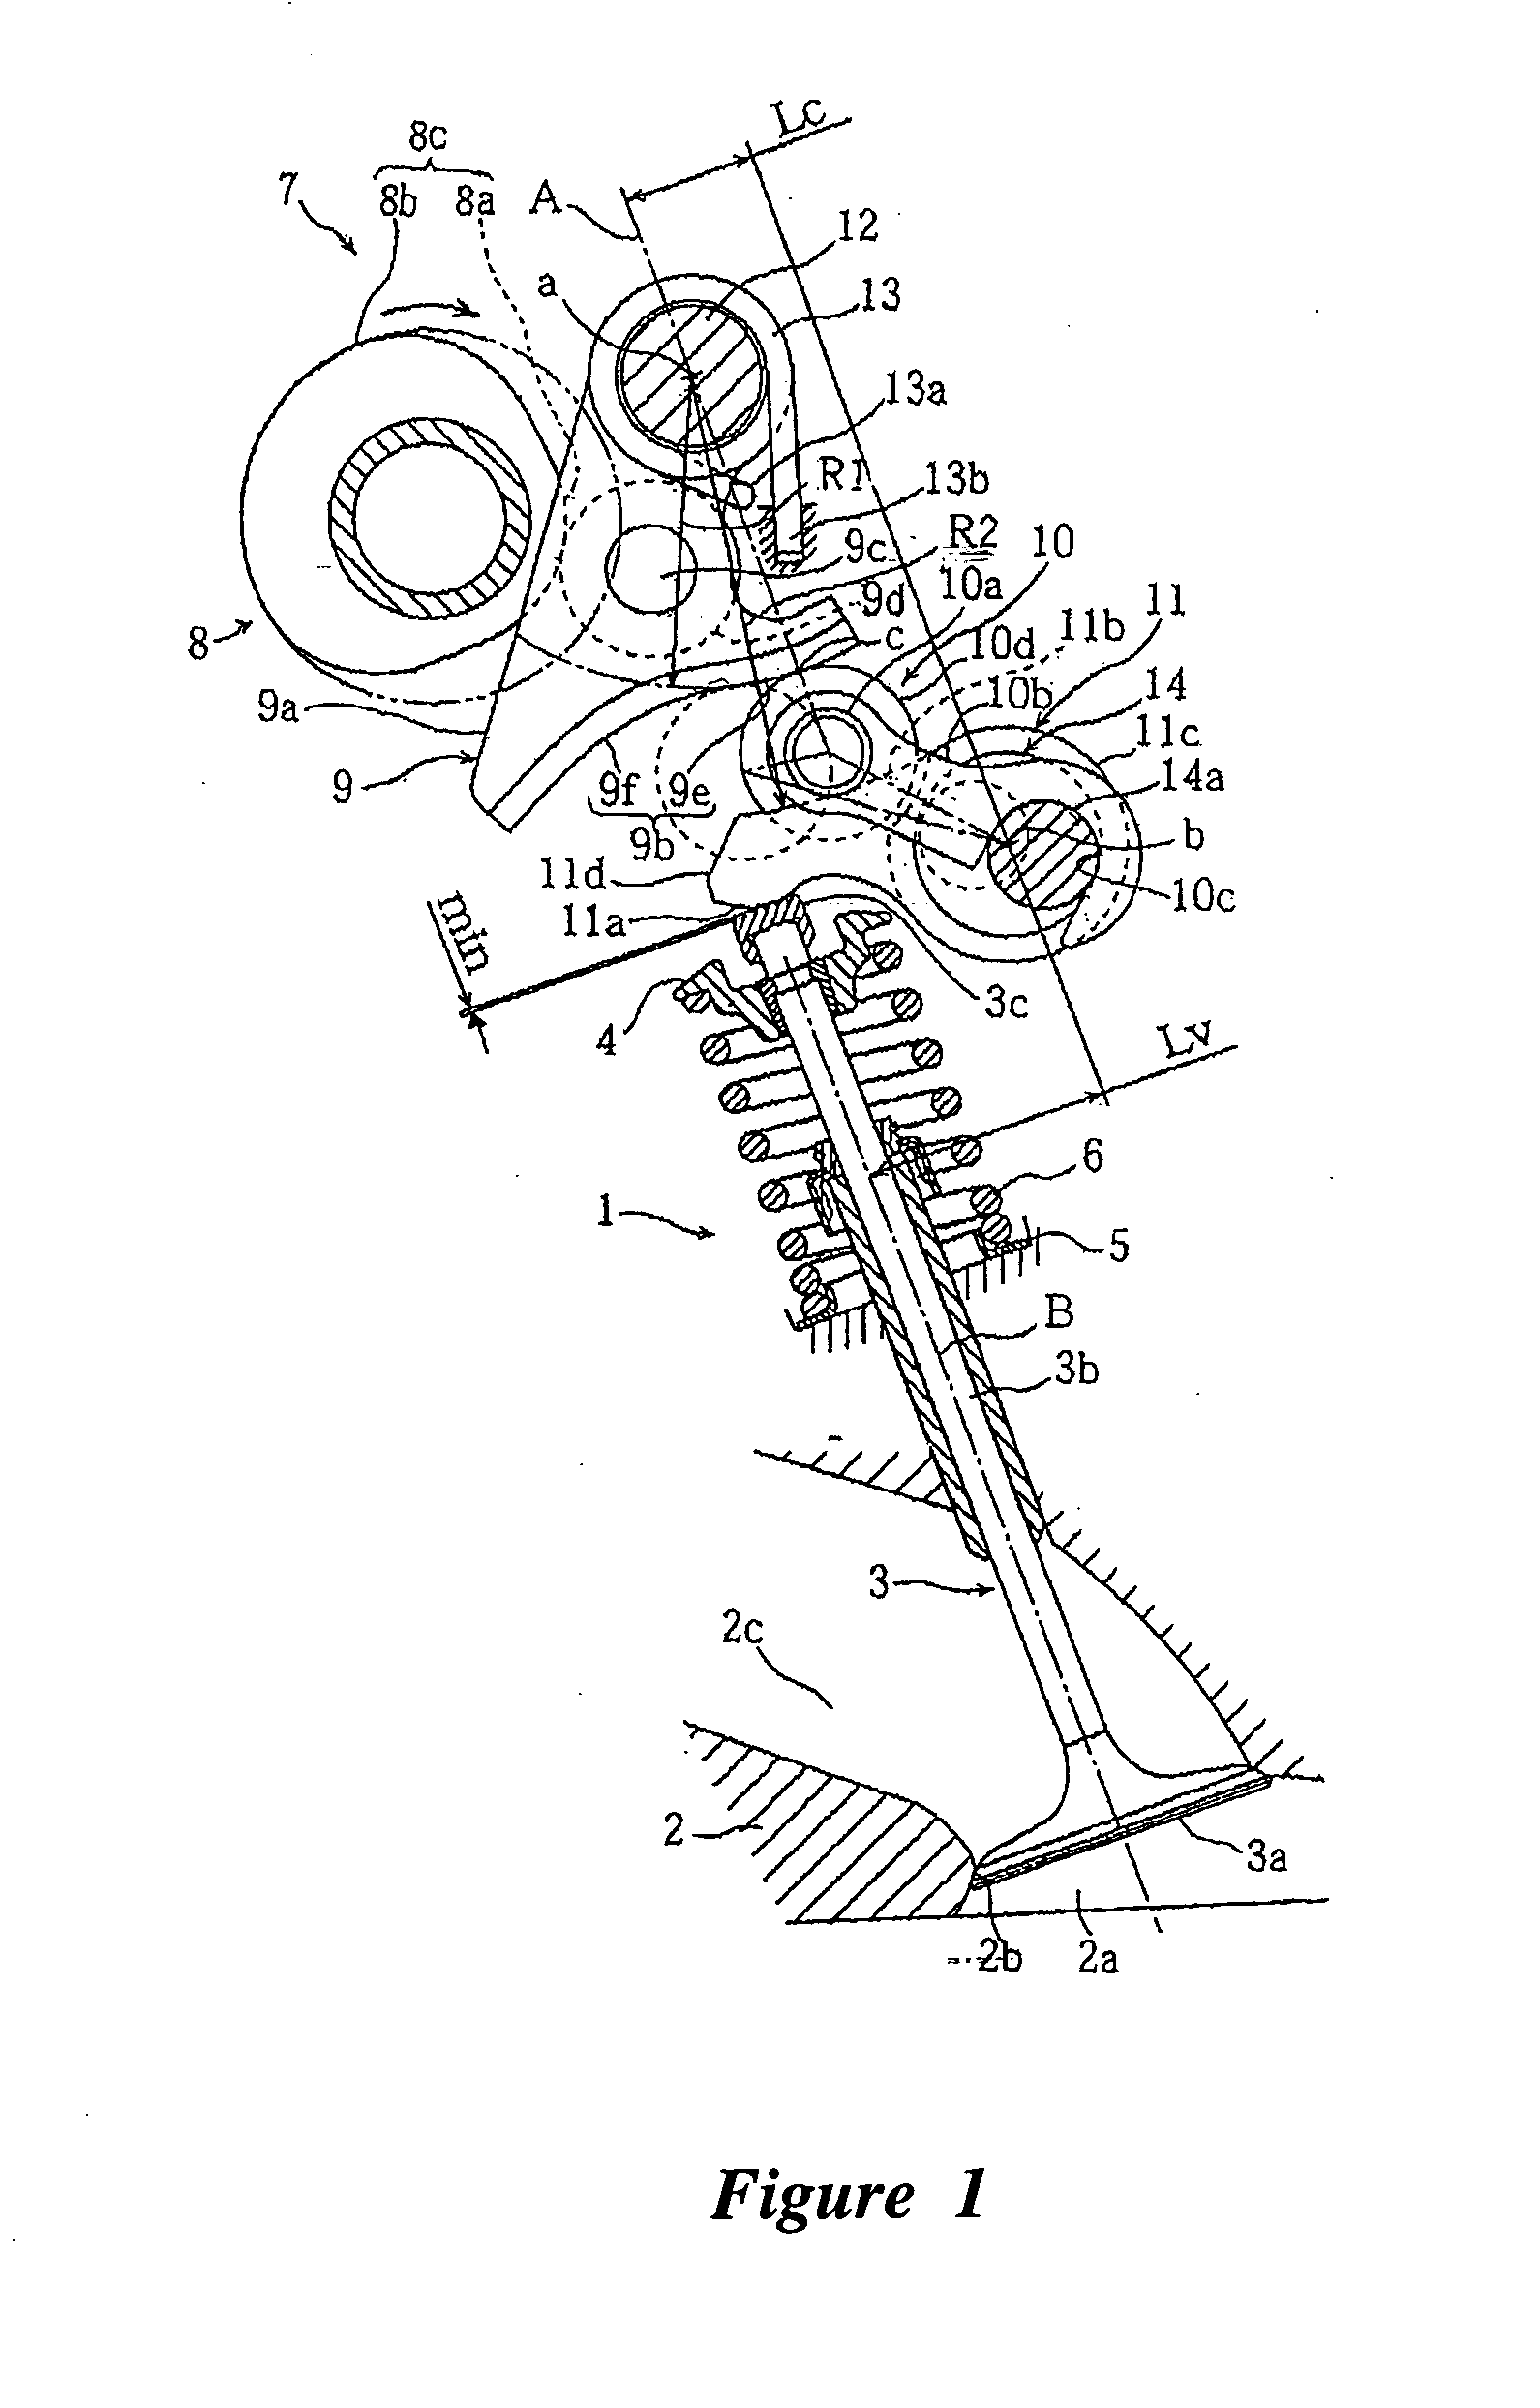 Valve train device for an engine